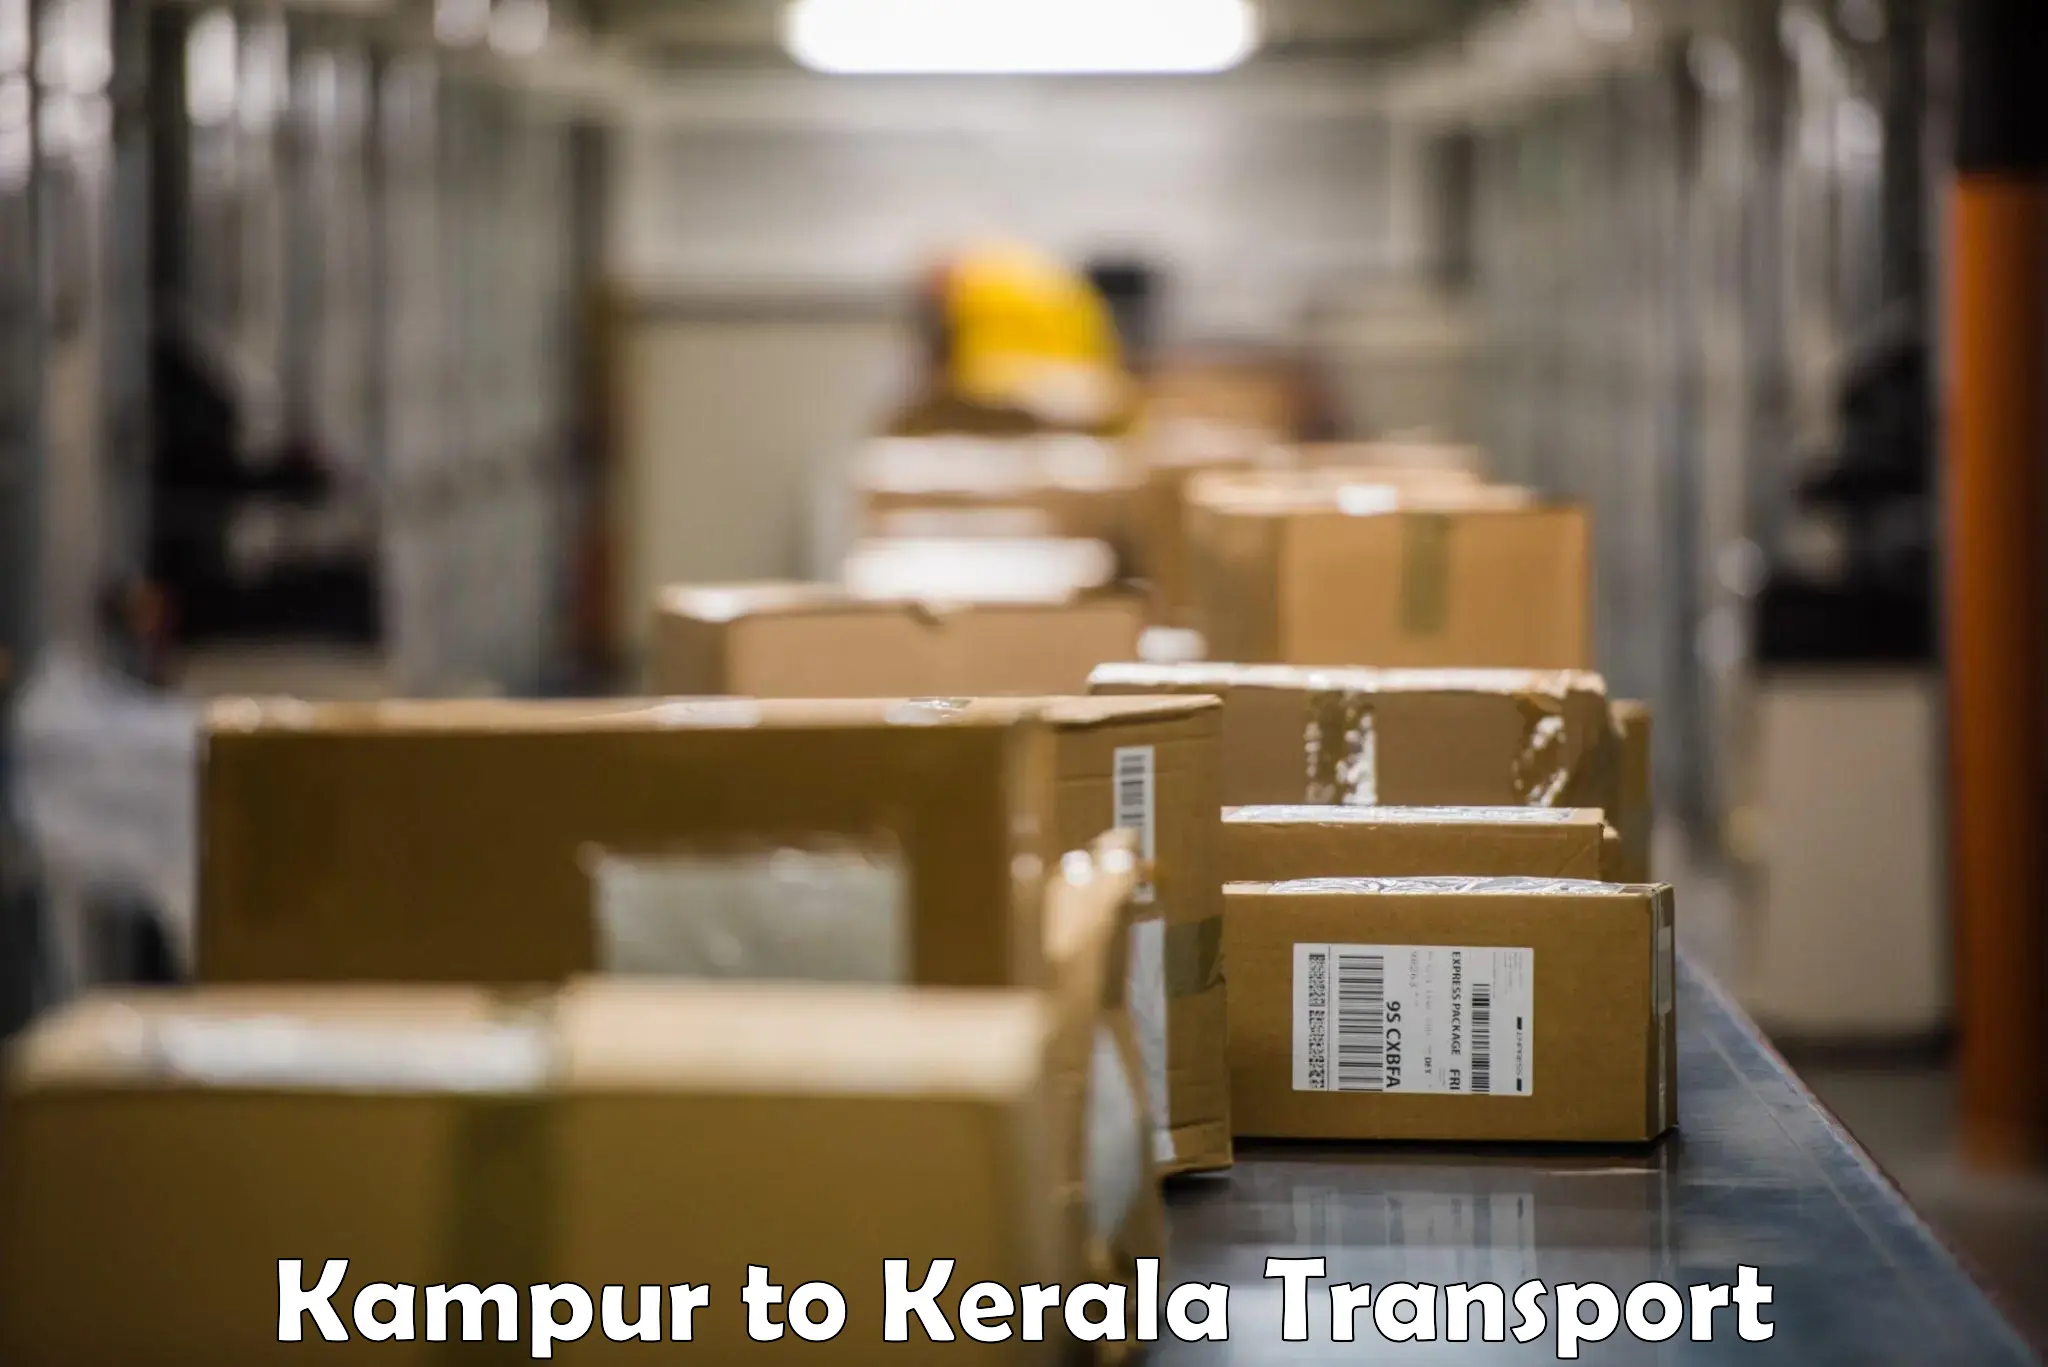 Truck transport companies in India Kampur to Cochin